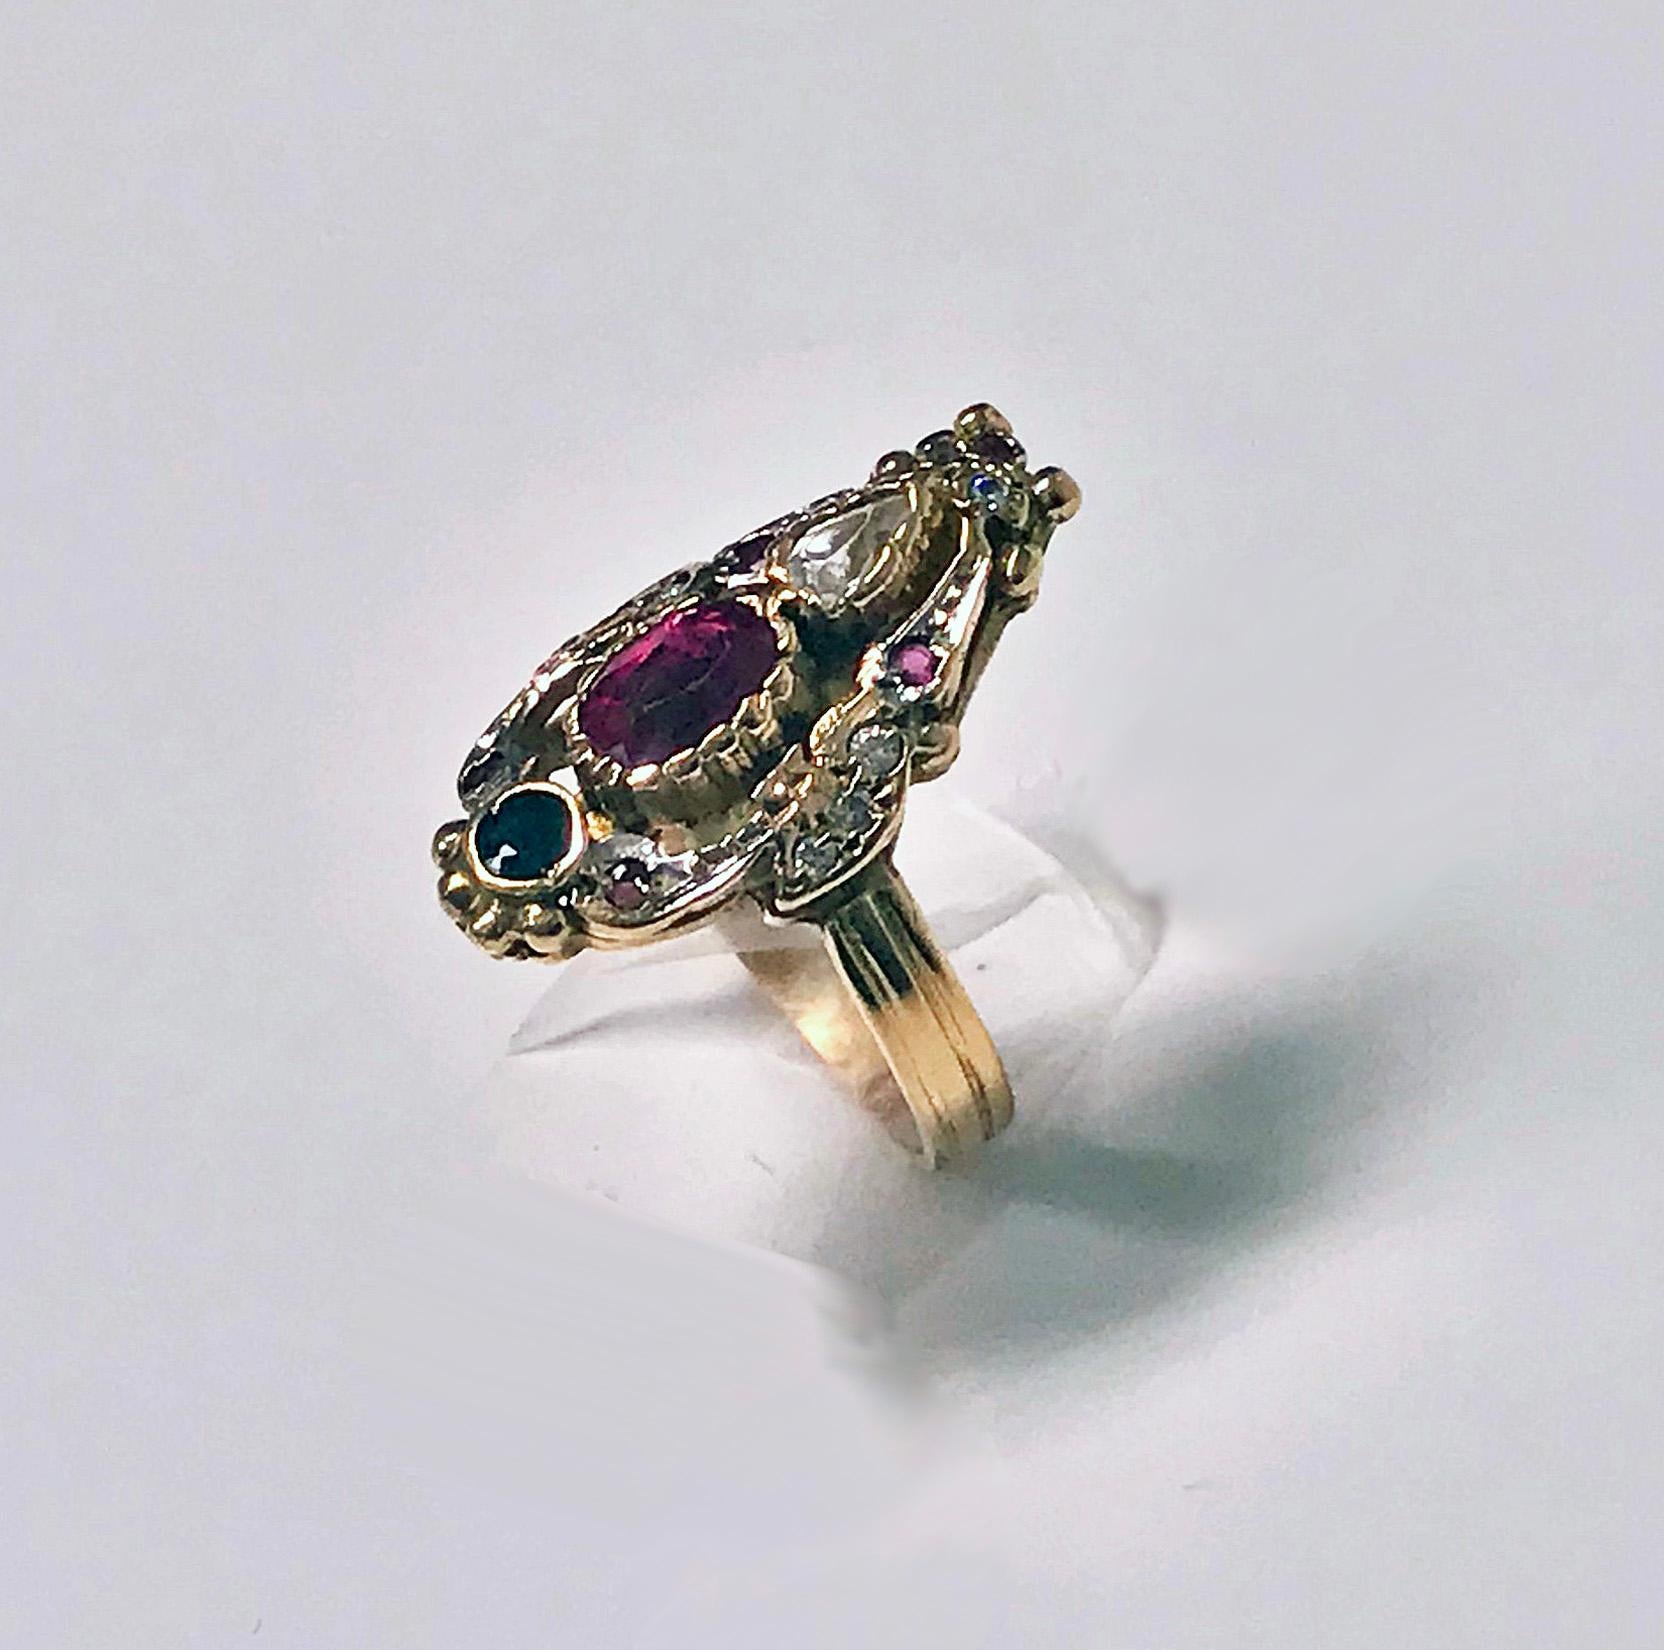 14K Art Nouveau style paste Ring, C.1930. The Ring of open stylised form set with red, blue and white stones, triple reed shank, stamped 585 on interior. Acid tested for 14K. Total Item Weight: 7.54 grams. Ring Size: 8.75.